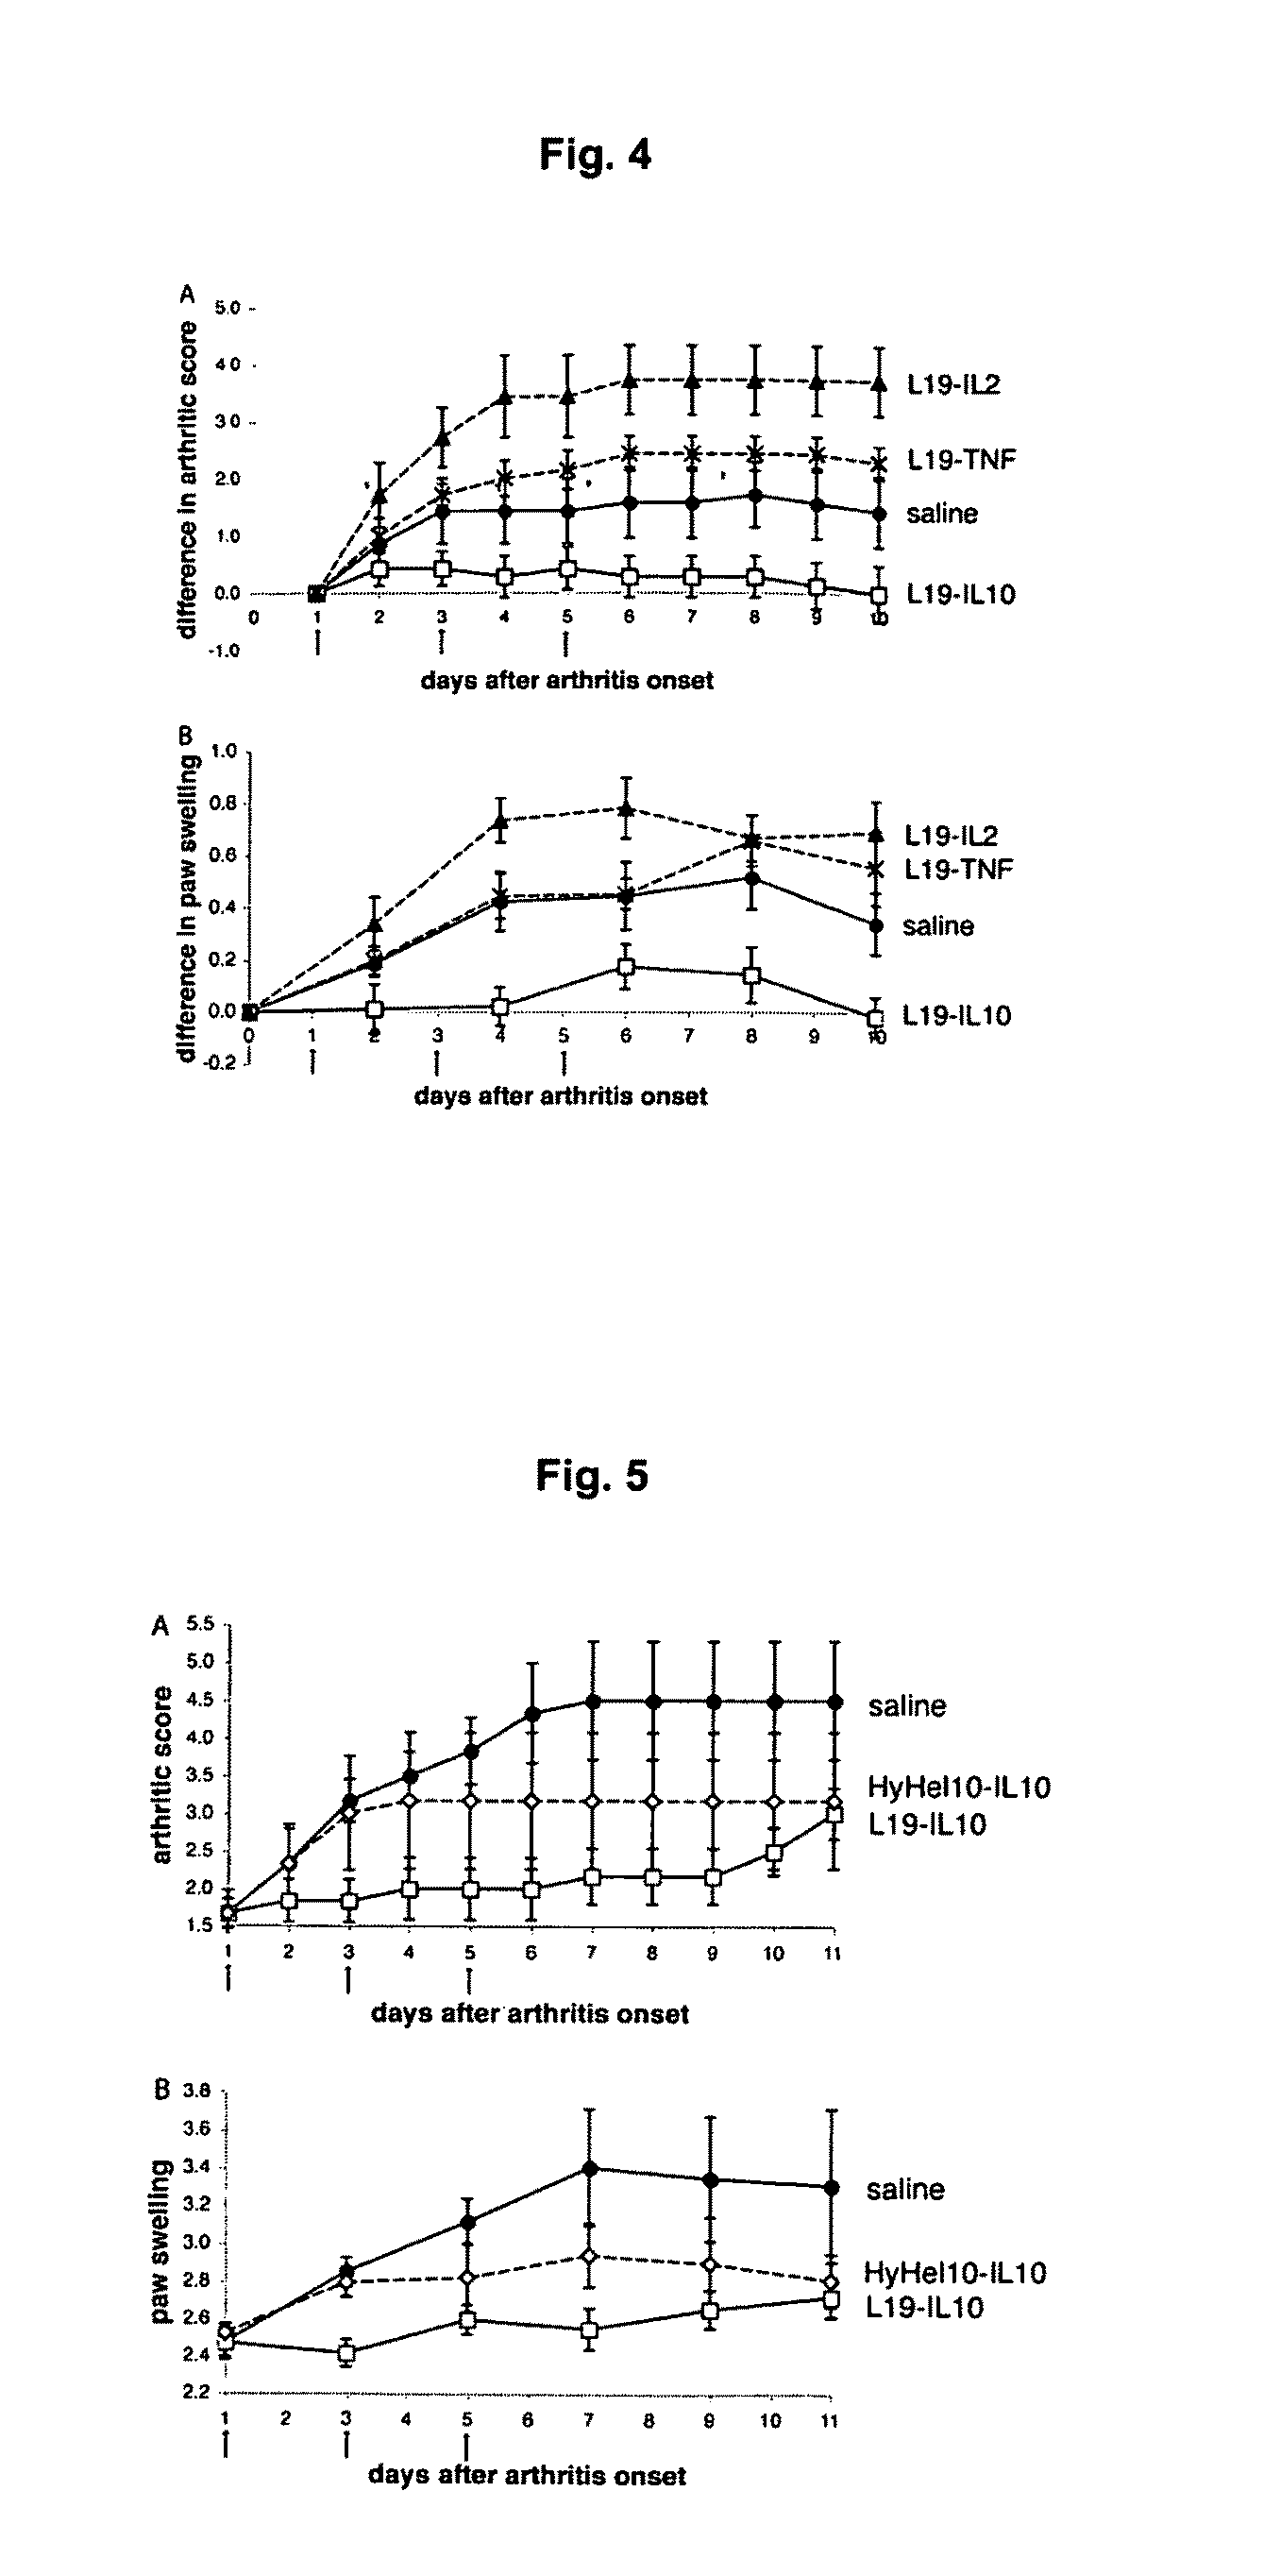 Antibody-Targeted Cytokines for Therapy